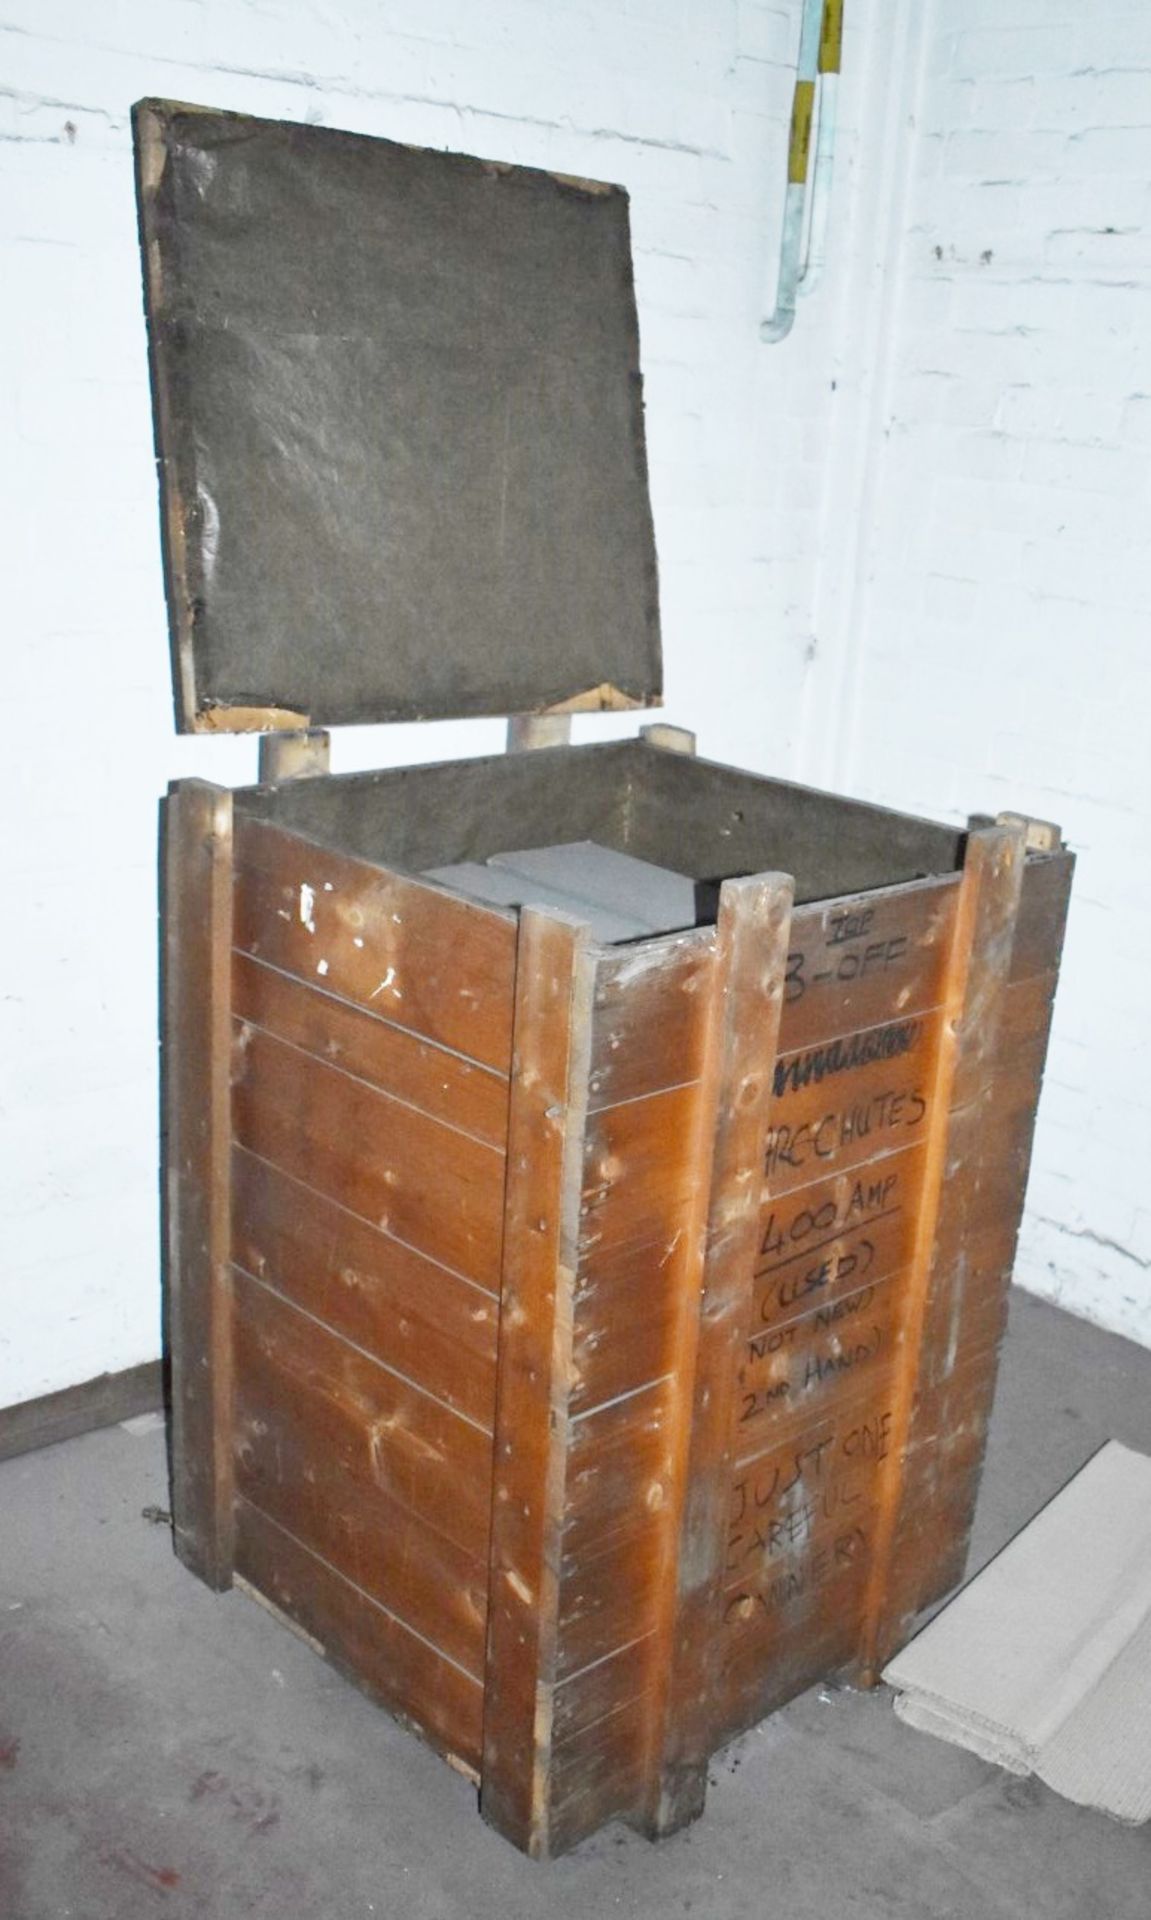 3 x Arc Chutes 400 amp in Vintage Wooden Crate - Ref EP - CL451 - Location: Scunthorpe, DN15